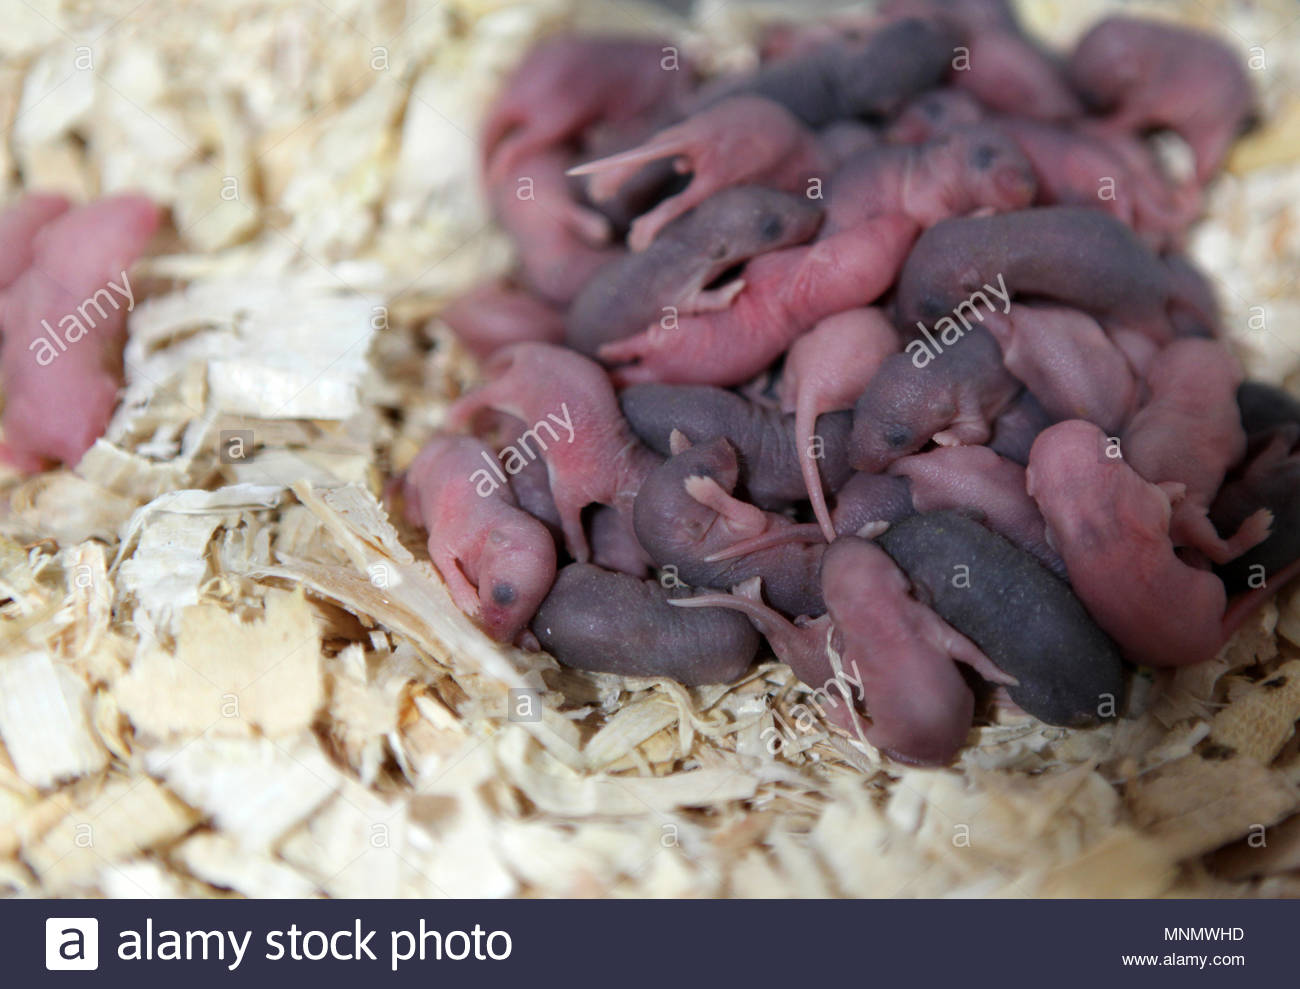 Baby Mice High Resolution Stock Photography And Images Alamy,Brandy Cocktails